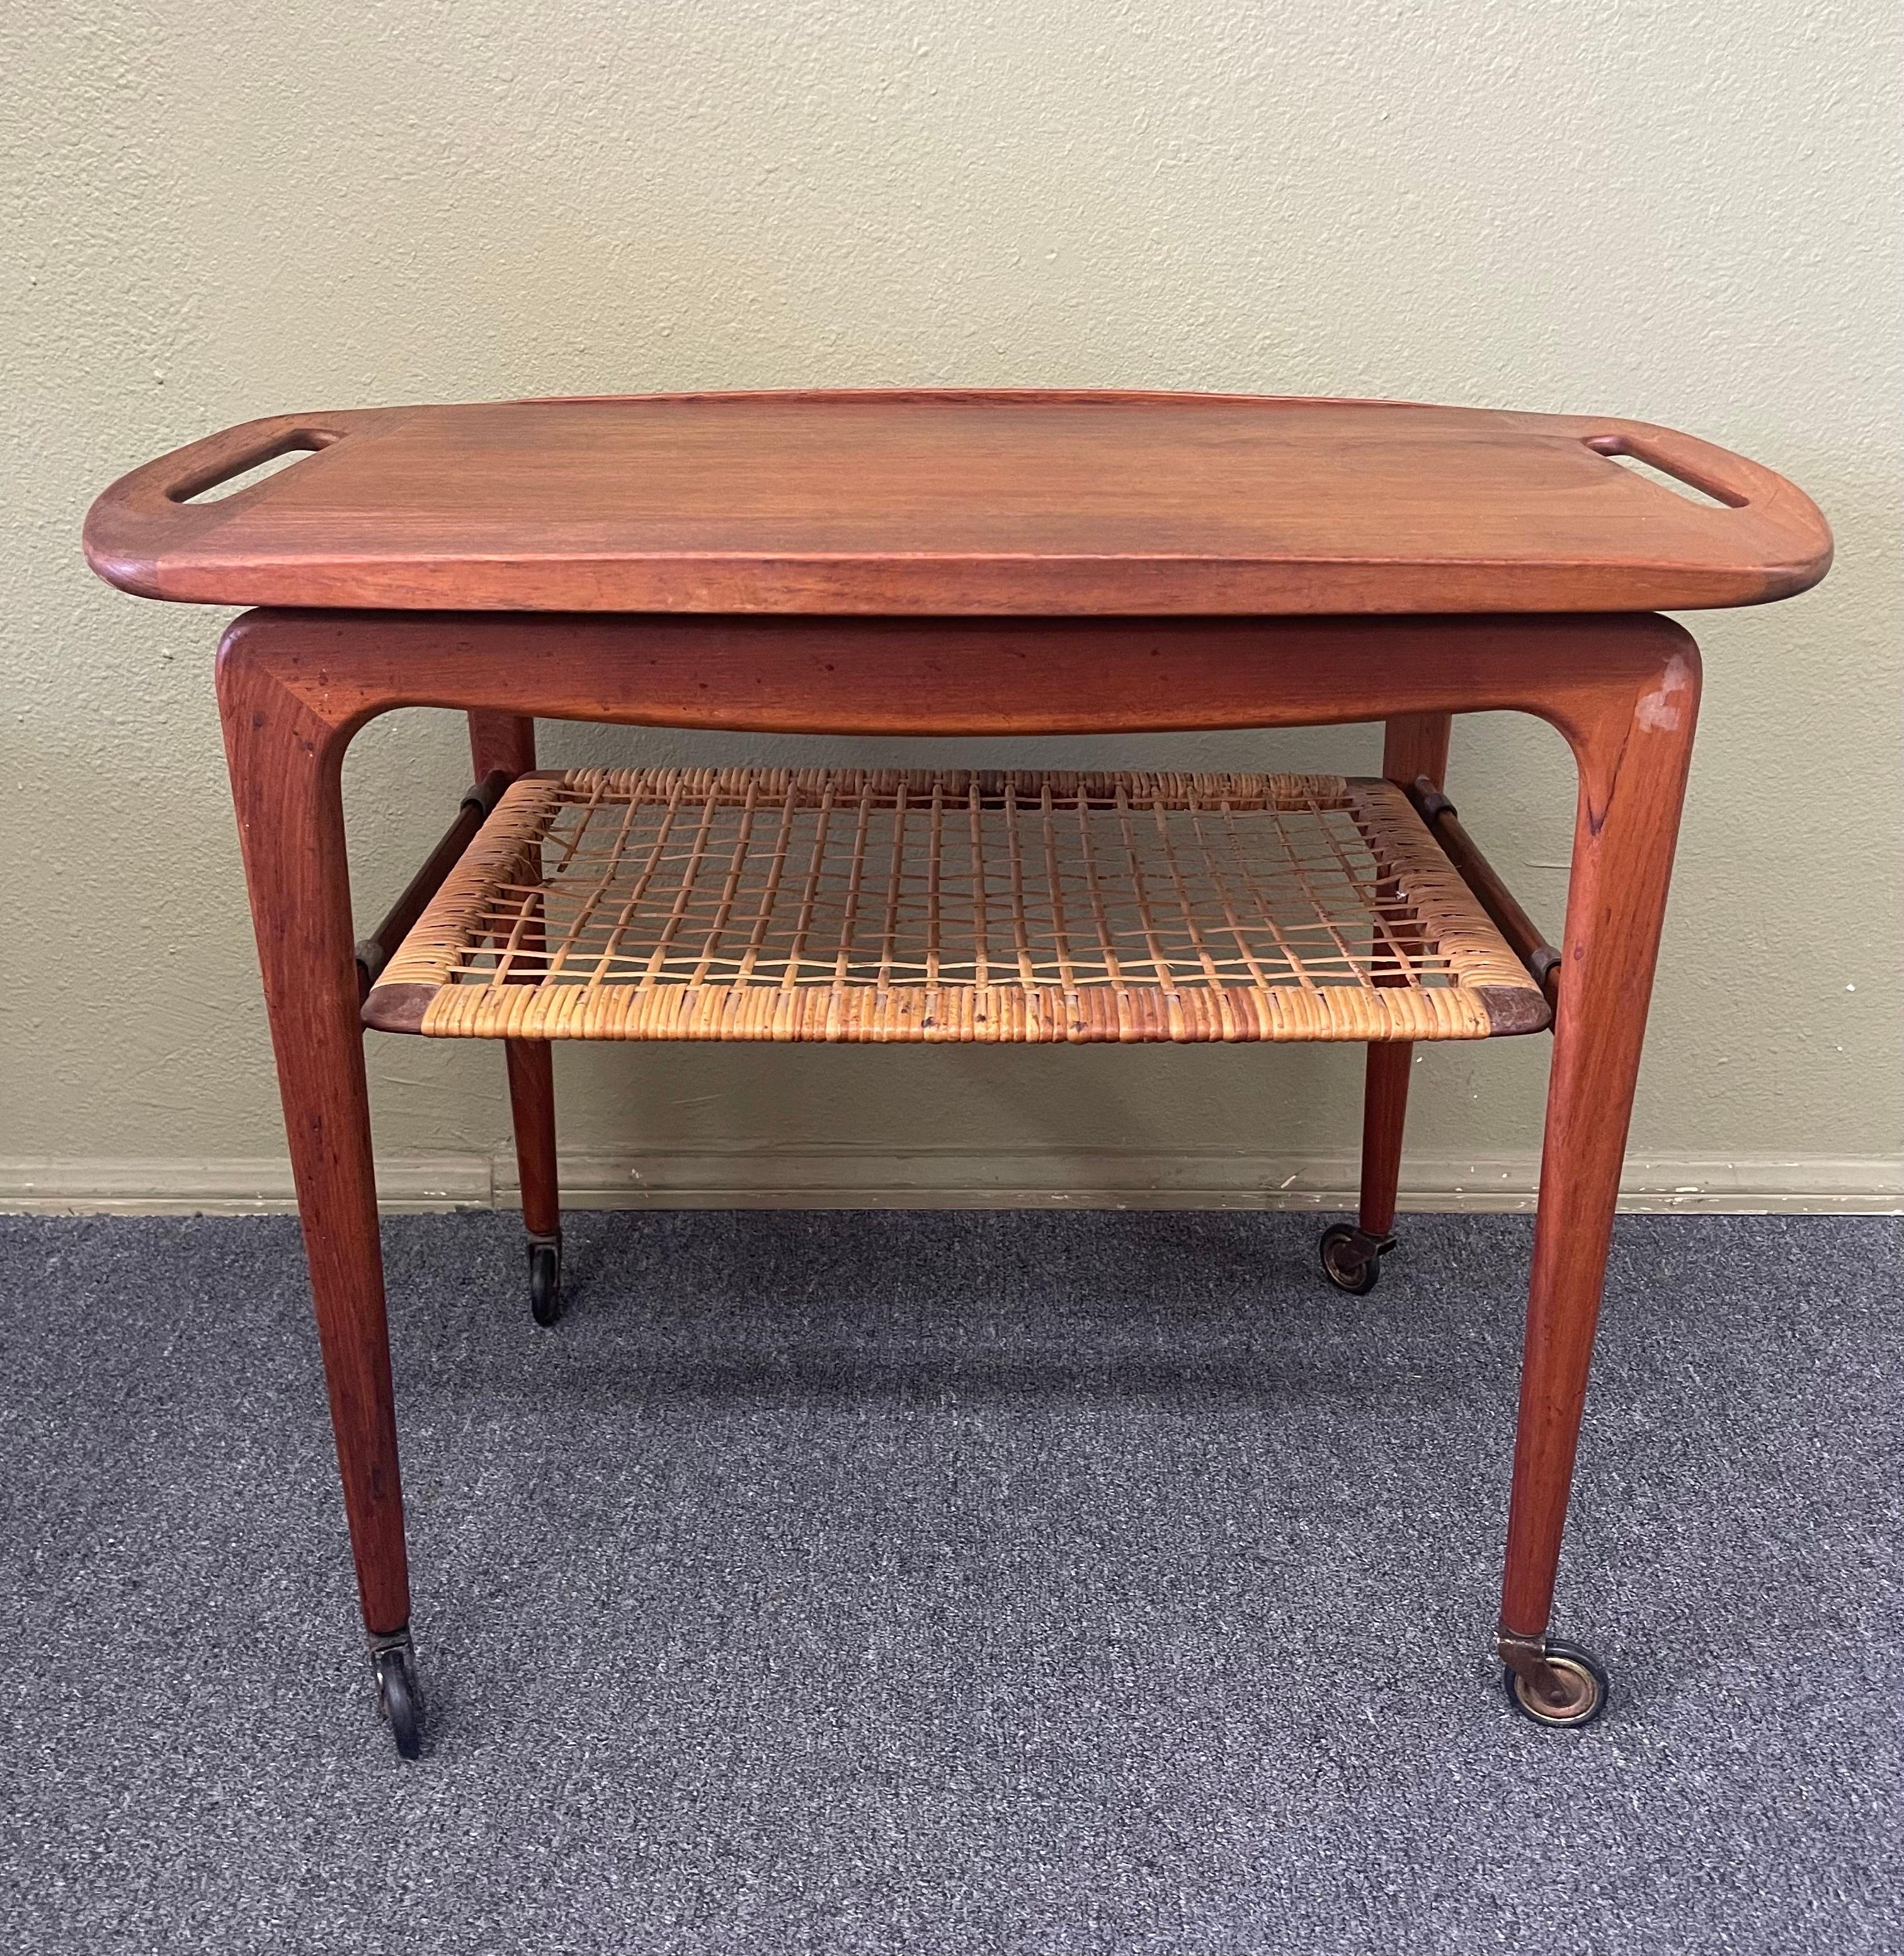 Danish Modern Teak Bar Cart with Removable Tray by Johannes Andersen / Silkeborg In Good Condition For Sale In San Diego, CA